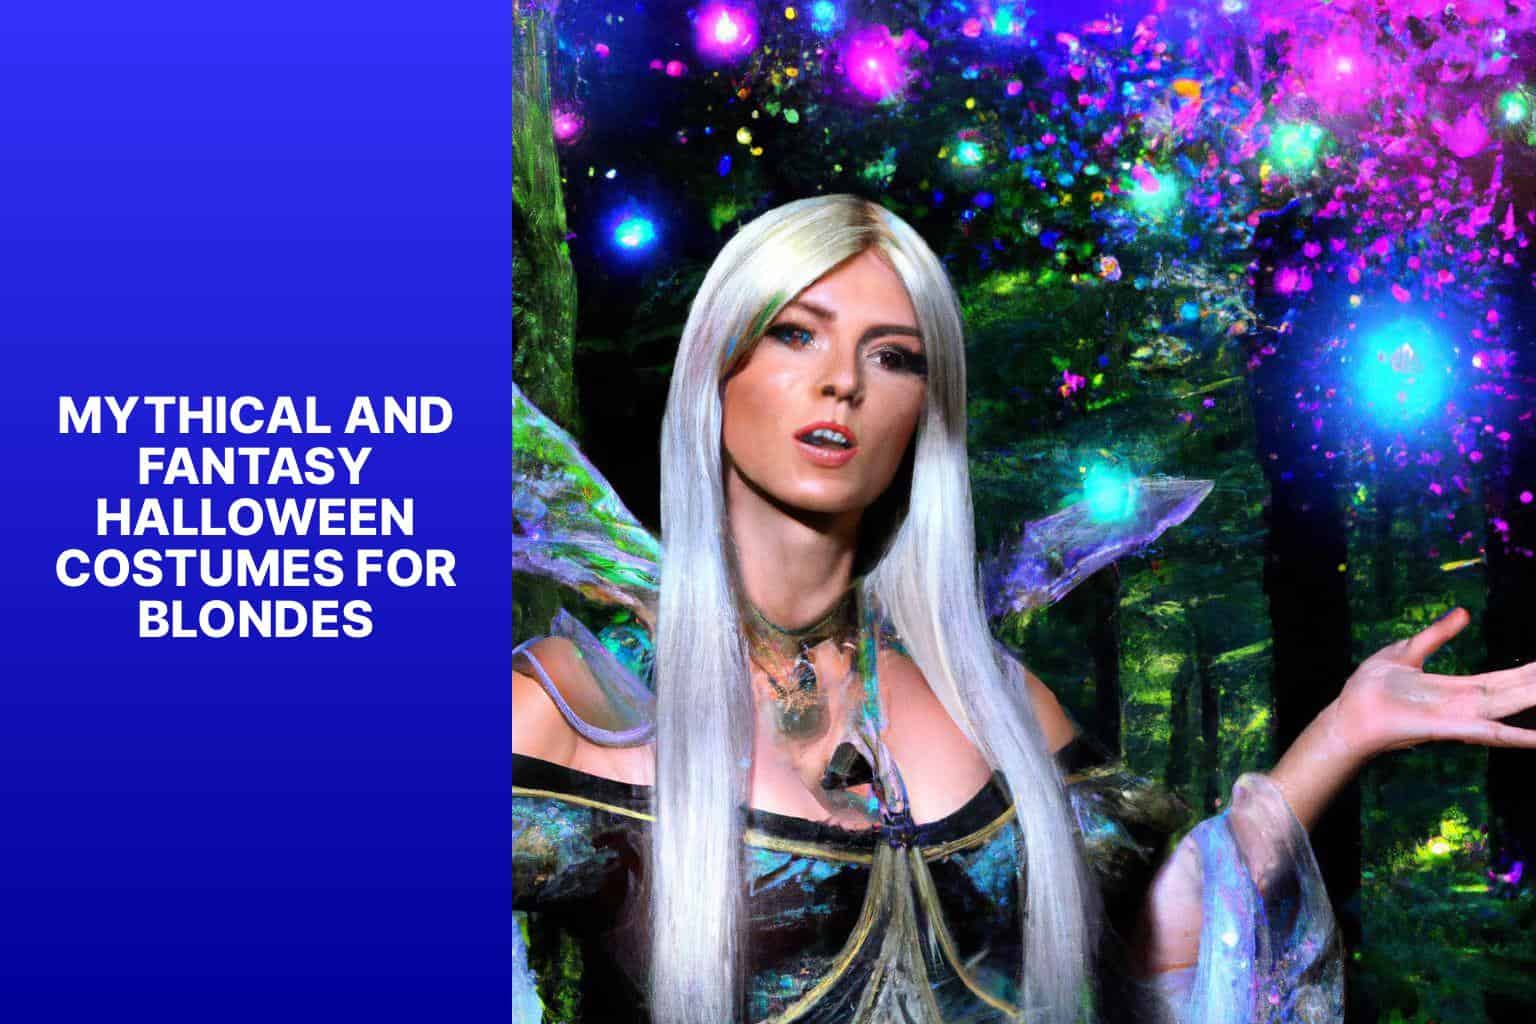 Mythical and Fantasy Halloween Costumes for Blondes - halloween costumes for blondes 